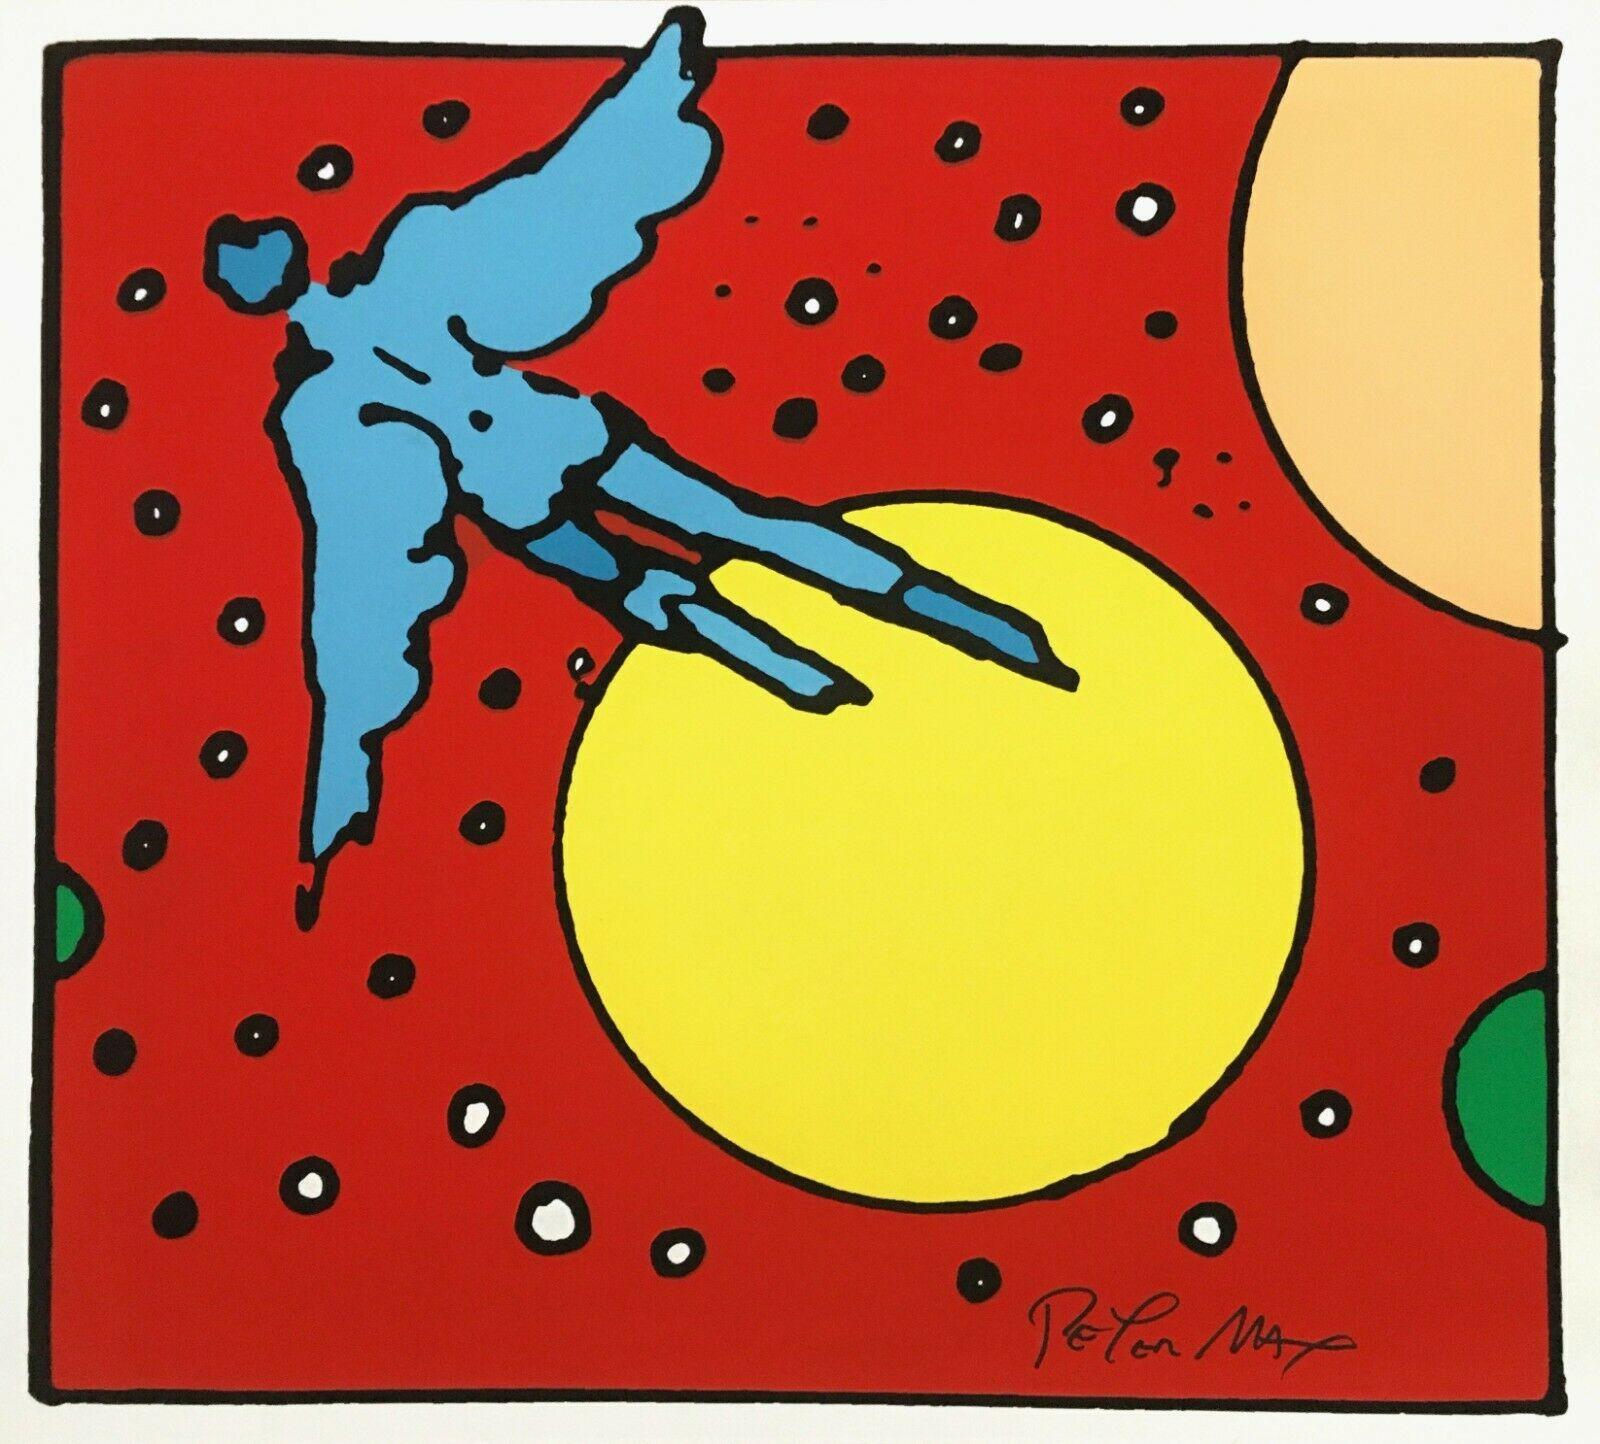 Artist: Peter Max (1937)
Title: Baloo Baba
Year: 1972
Edition: 300, plus proofs
Medium: Silkscreen on wove paper
Size: 16 x 18 inches
Condition: Excellent
Inscription: Signed by the artist.
Notes: Published by Via Max. A rare, unnumbered trial